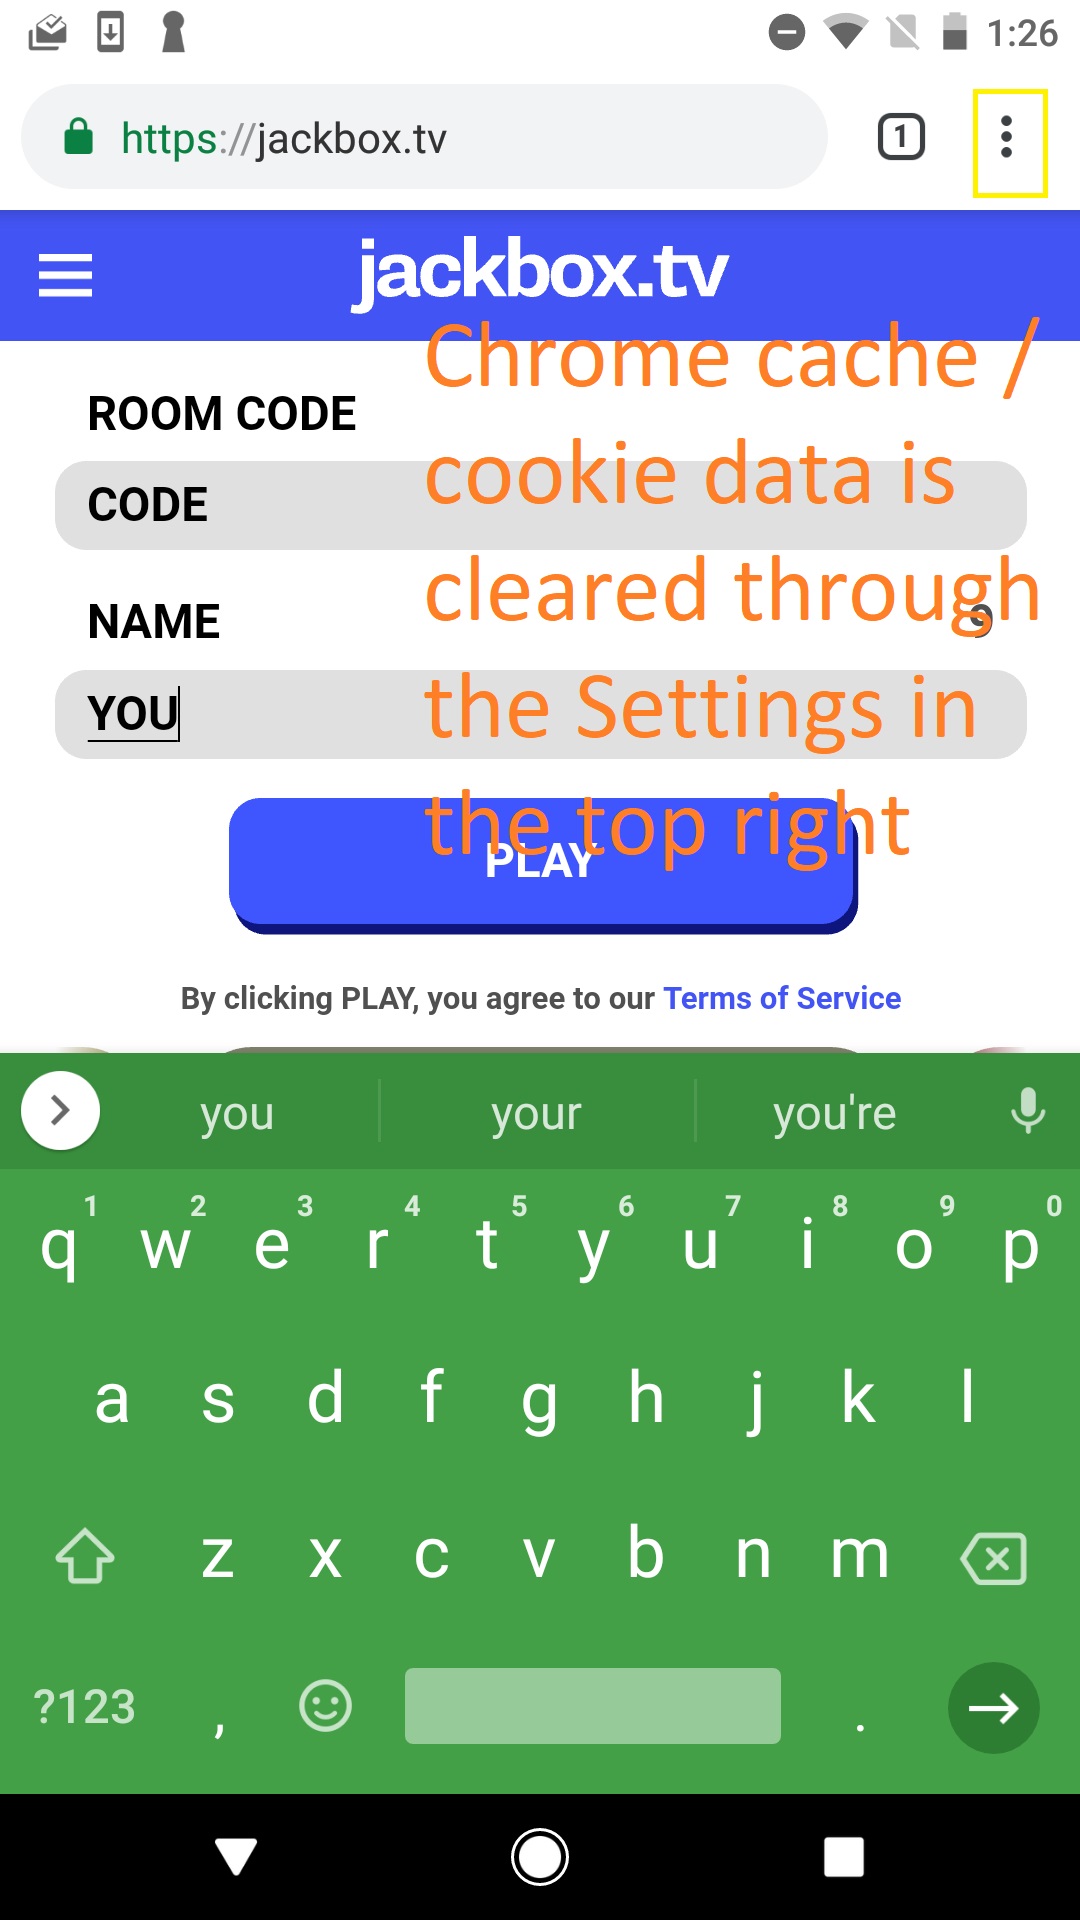 Jackbox.tv on Android Chrome. 3 vertical black dots on the far upper right of URL. Text: Chrome cache/cookie is cleared here.